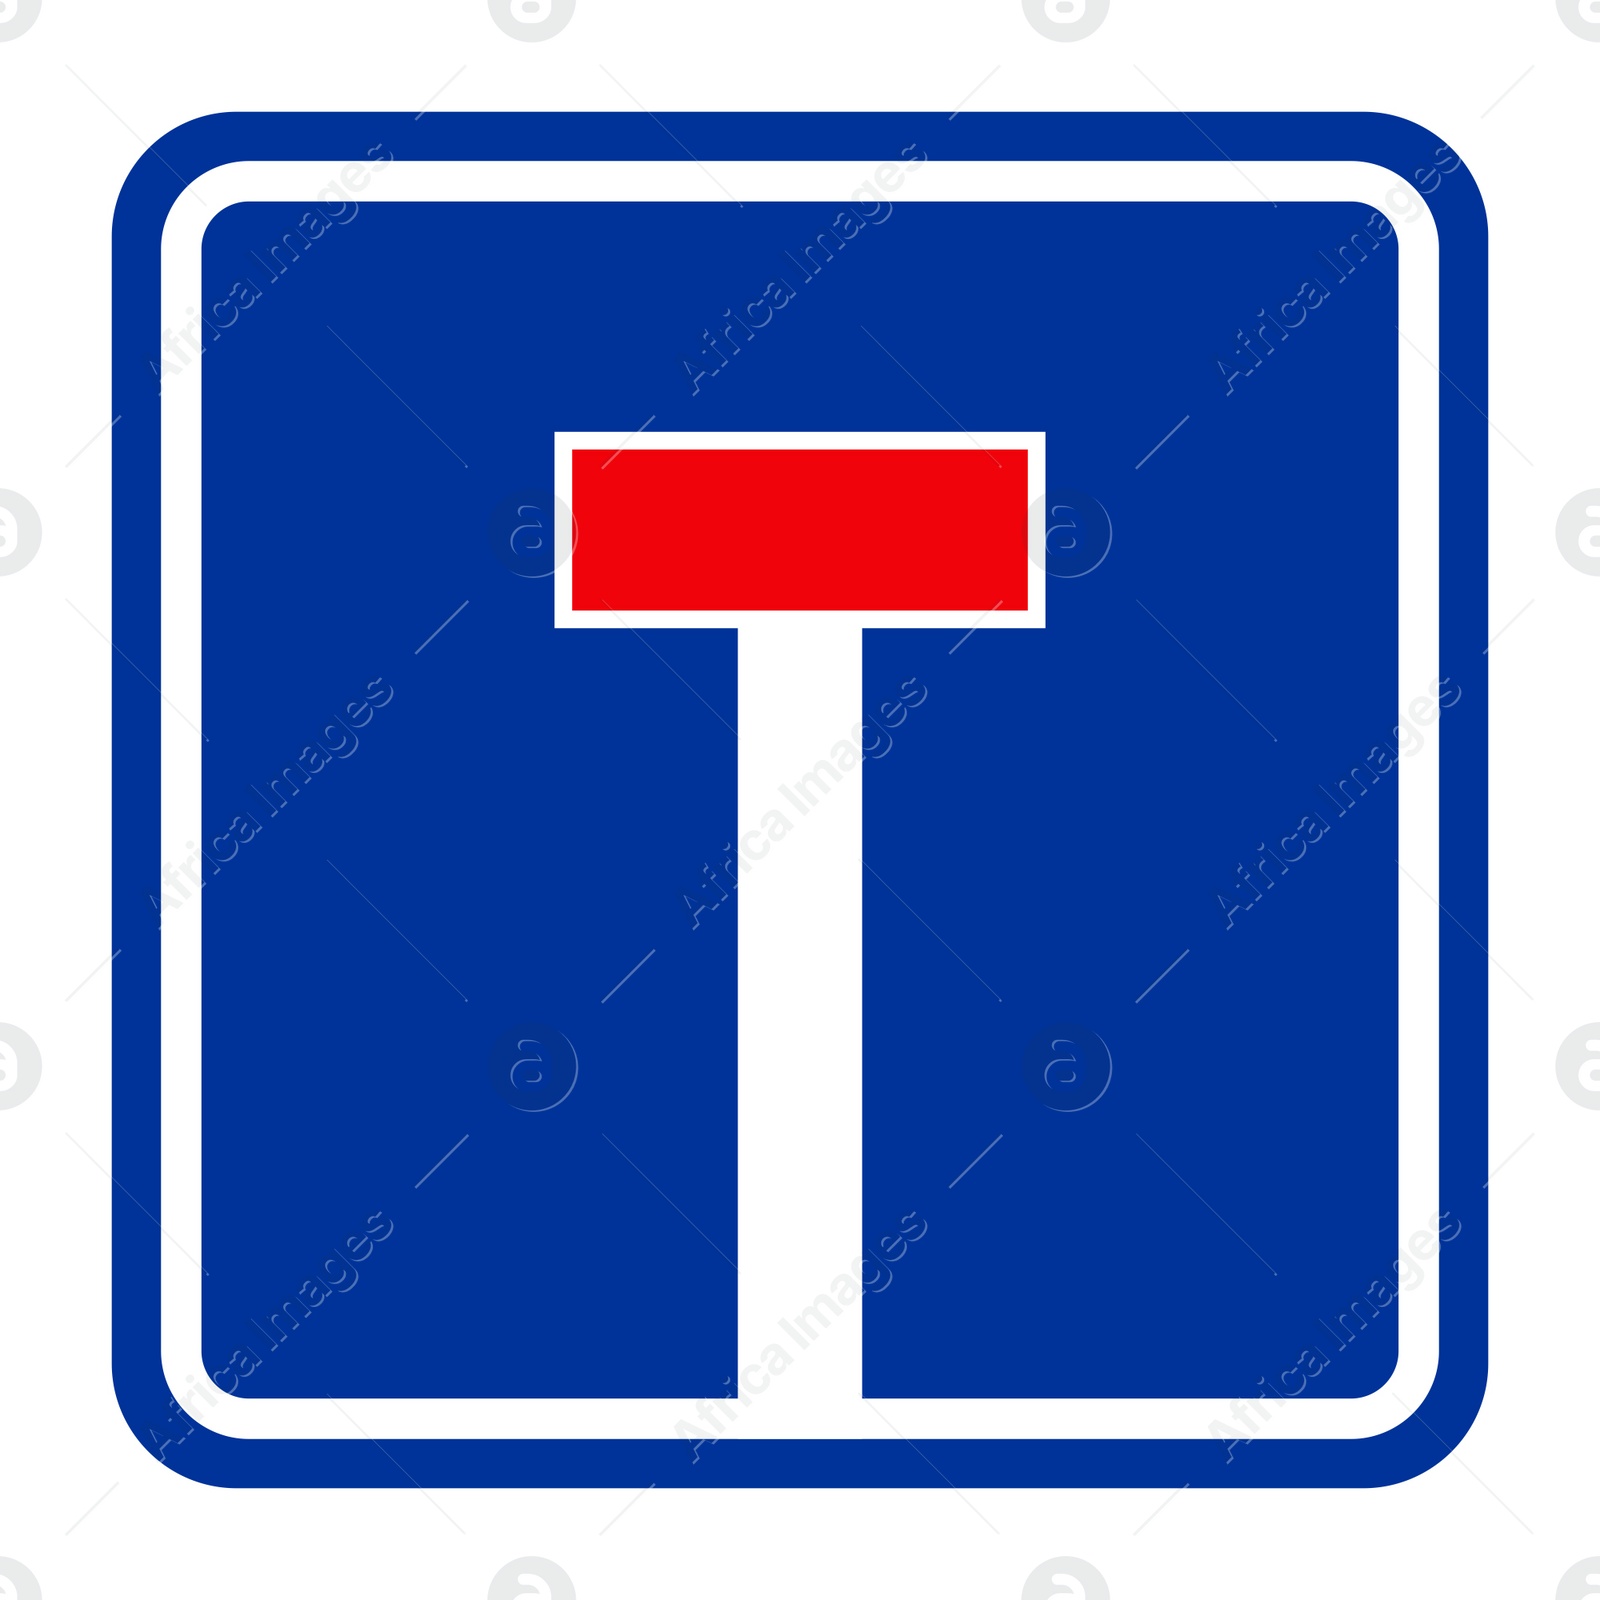 Illustration of Traffic sign NO THROUGH ROAD FOR VEHICLES on white background, illustration 